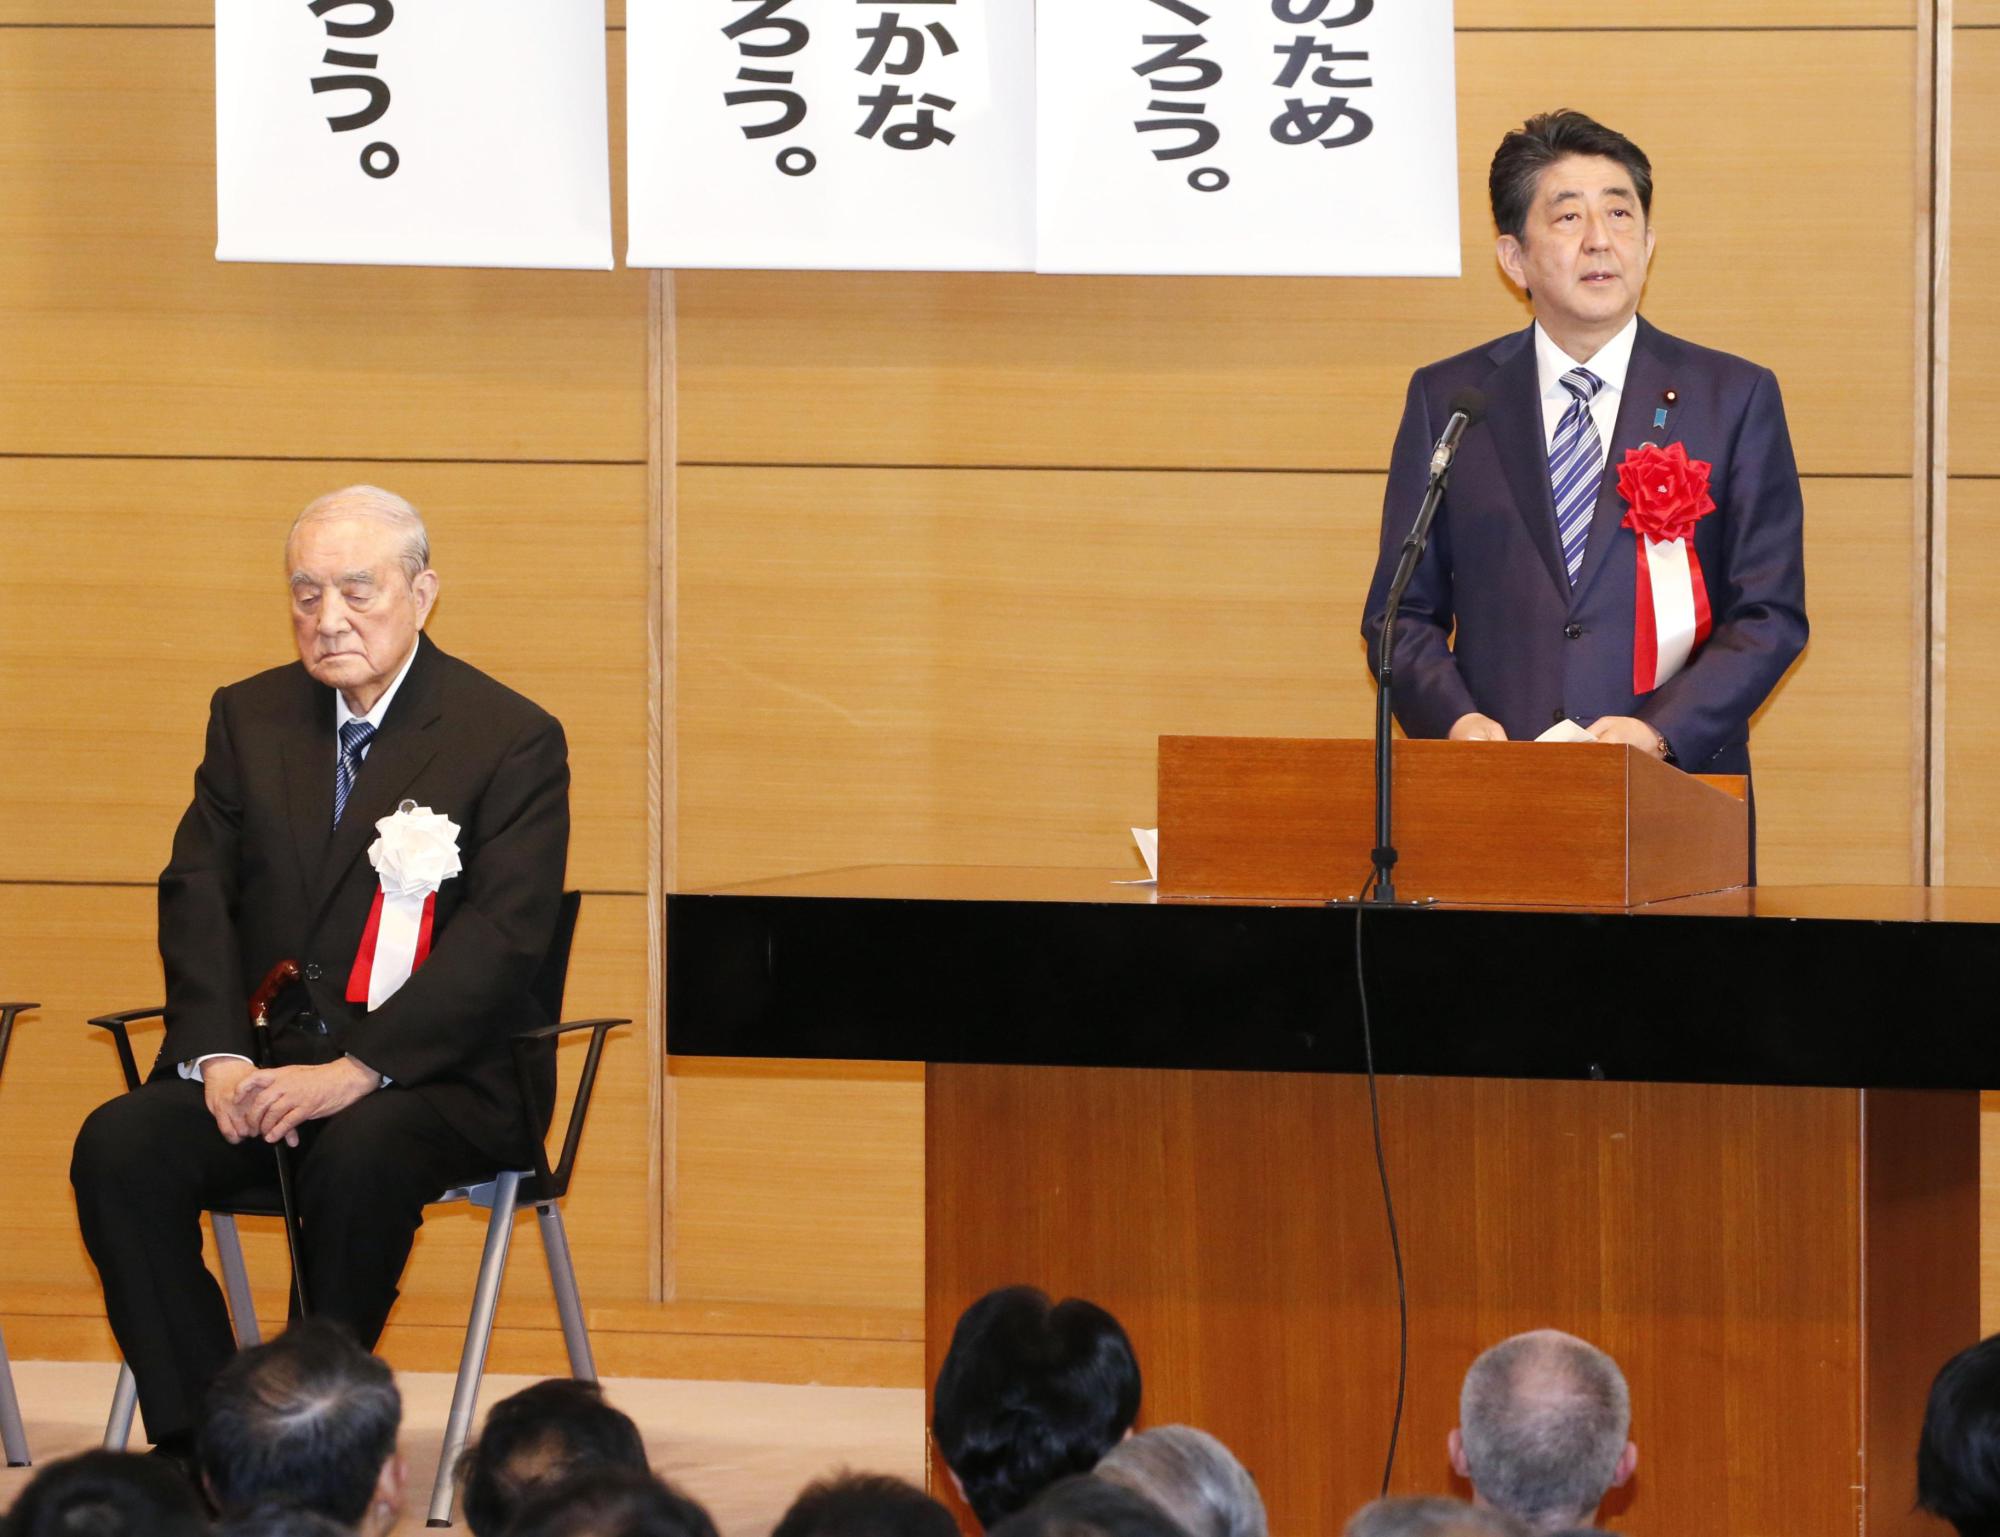 Prime Minister Shinzo Abe speaks at a gathering in Tokyo Monday of a cross-party league of lawmakers who favor amending the Constitution, alongside former Prime Minister Yasuhiro Nakasone. | KYODO